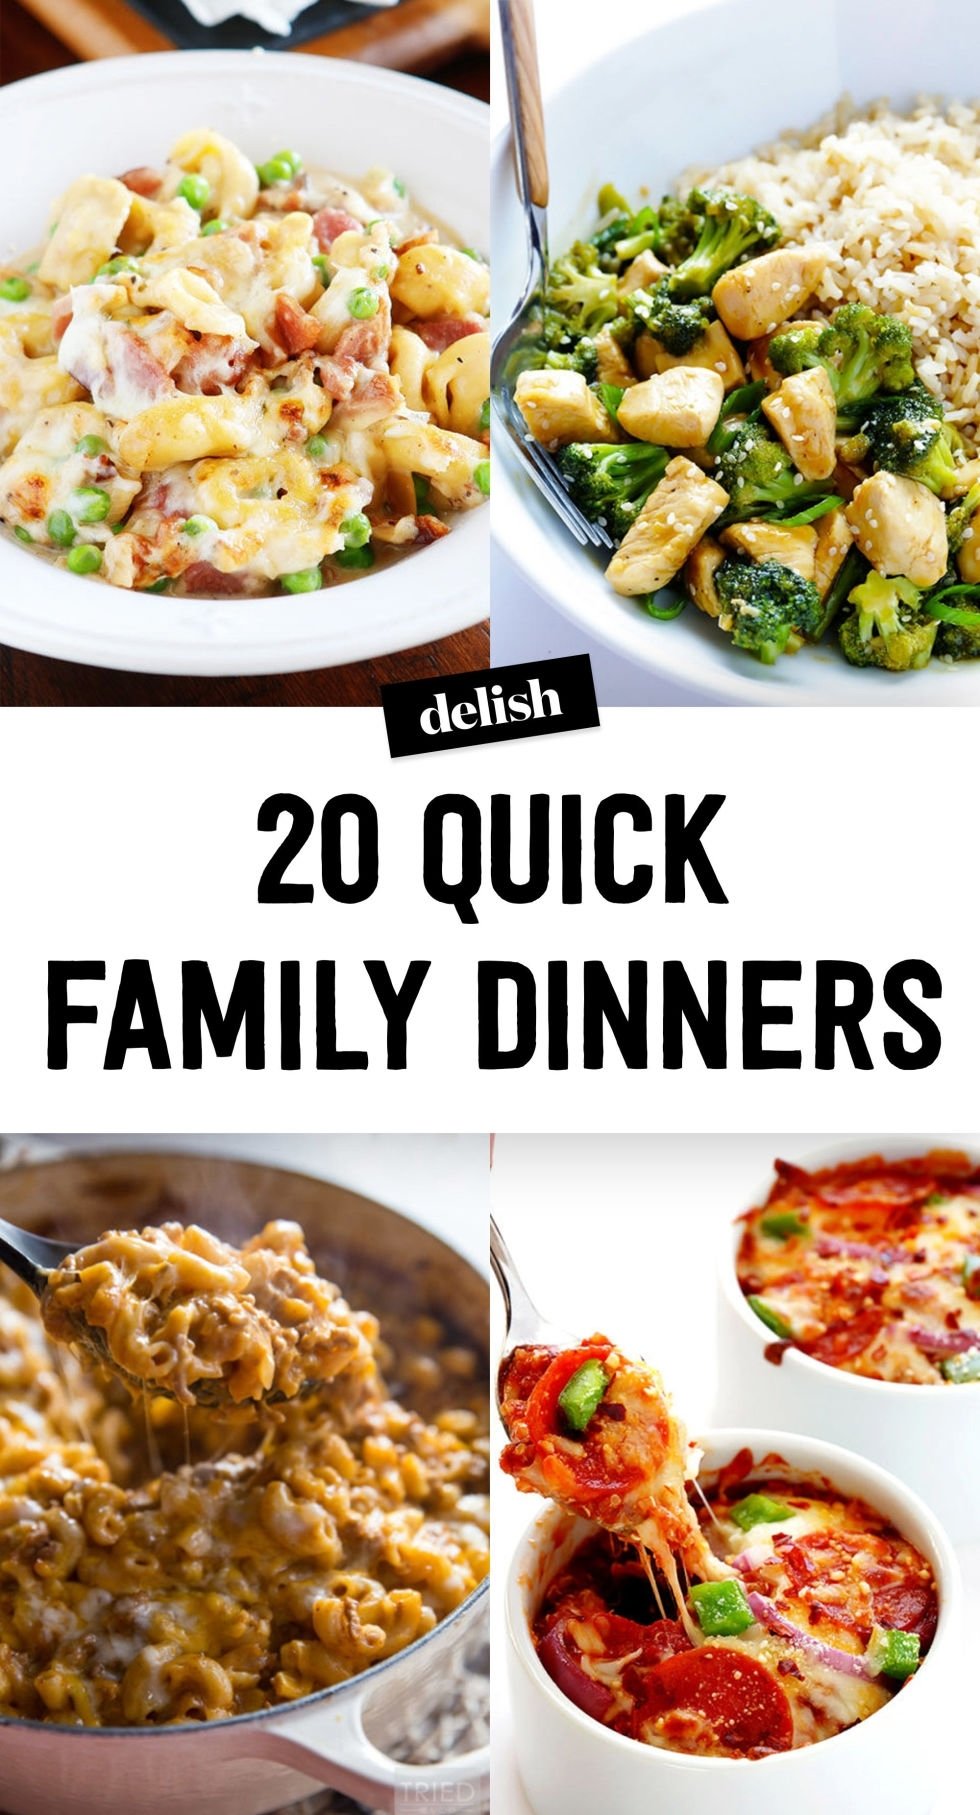 10 Beautiful Cheap And Easy Meal Ideas download easy fast dinner recipes for family food photos 5 2022